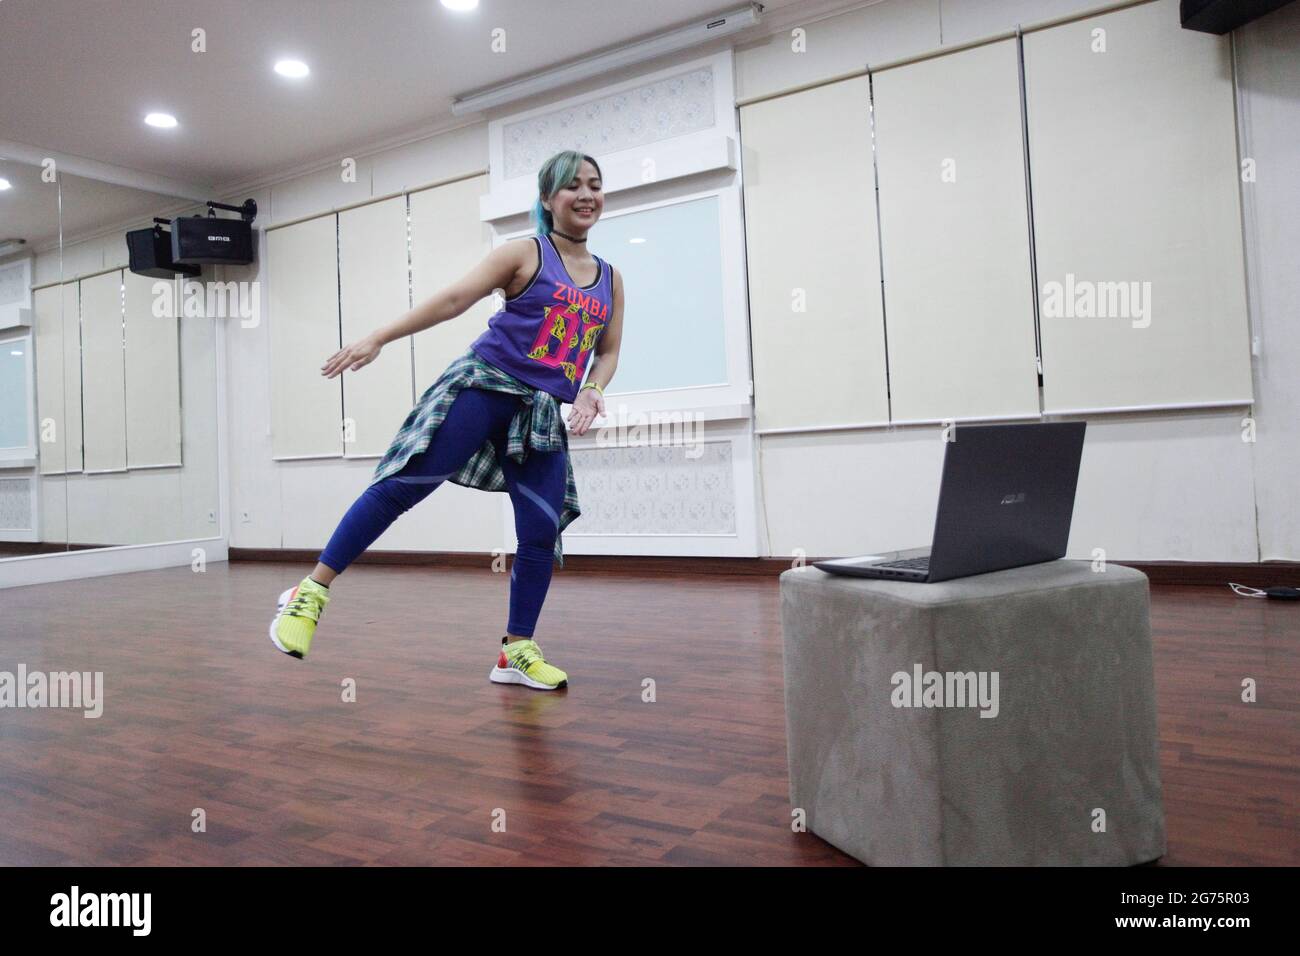 Bogor, Indonesia. 11th July, 2021. A Zumba instructor leads an online Zumba  fitness session over Zoom from her studios on July 11, 2021 in Bogor, West  Java, Indonesia. Zumba fitness is a